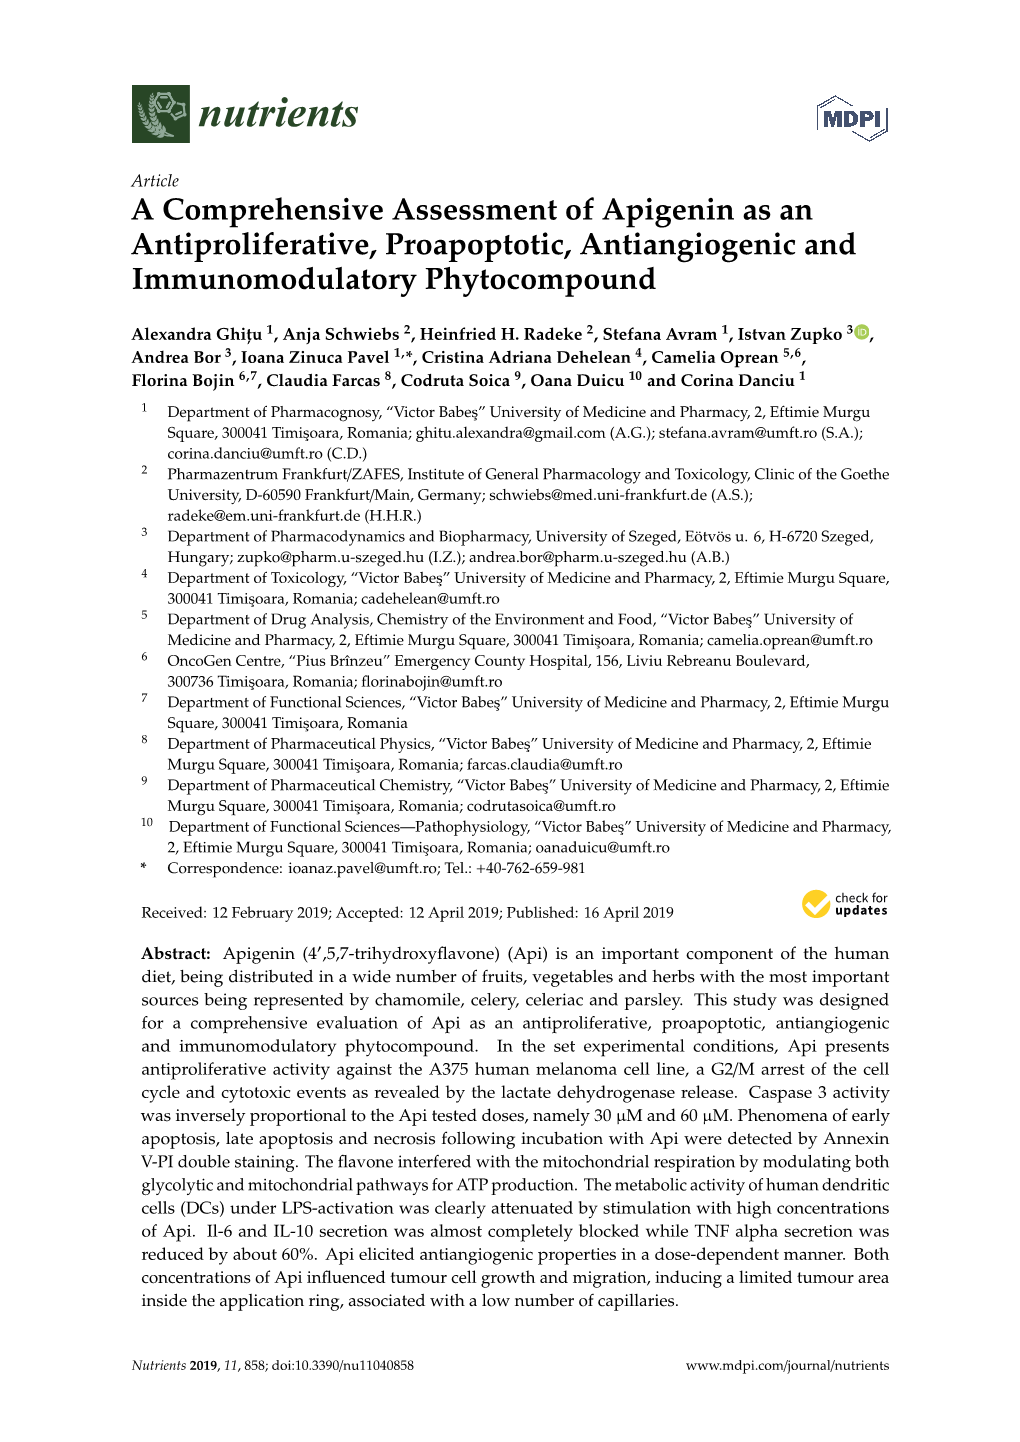 A Comprehensive Assessment of Apigenin As an Antiproliferative, Proapoptotic, Antiangiogenic and Immunomodulatory Phytocompound